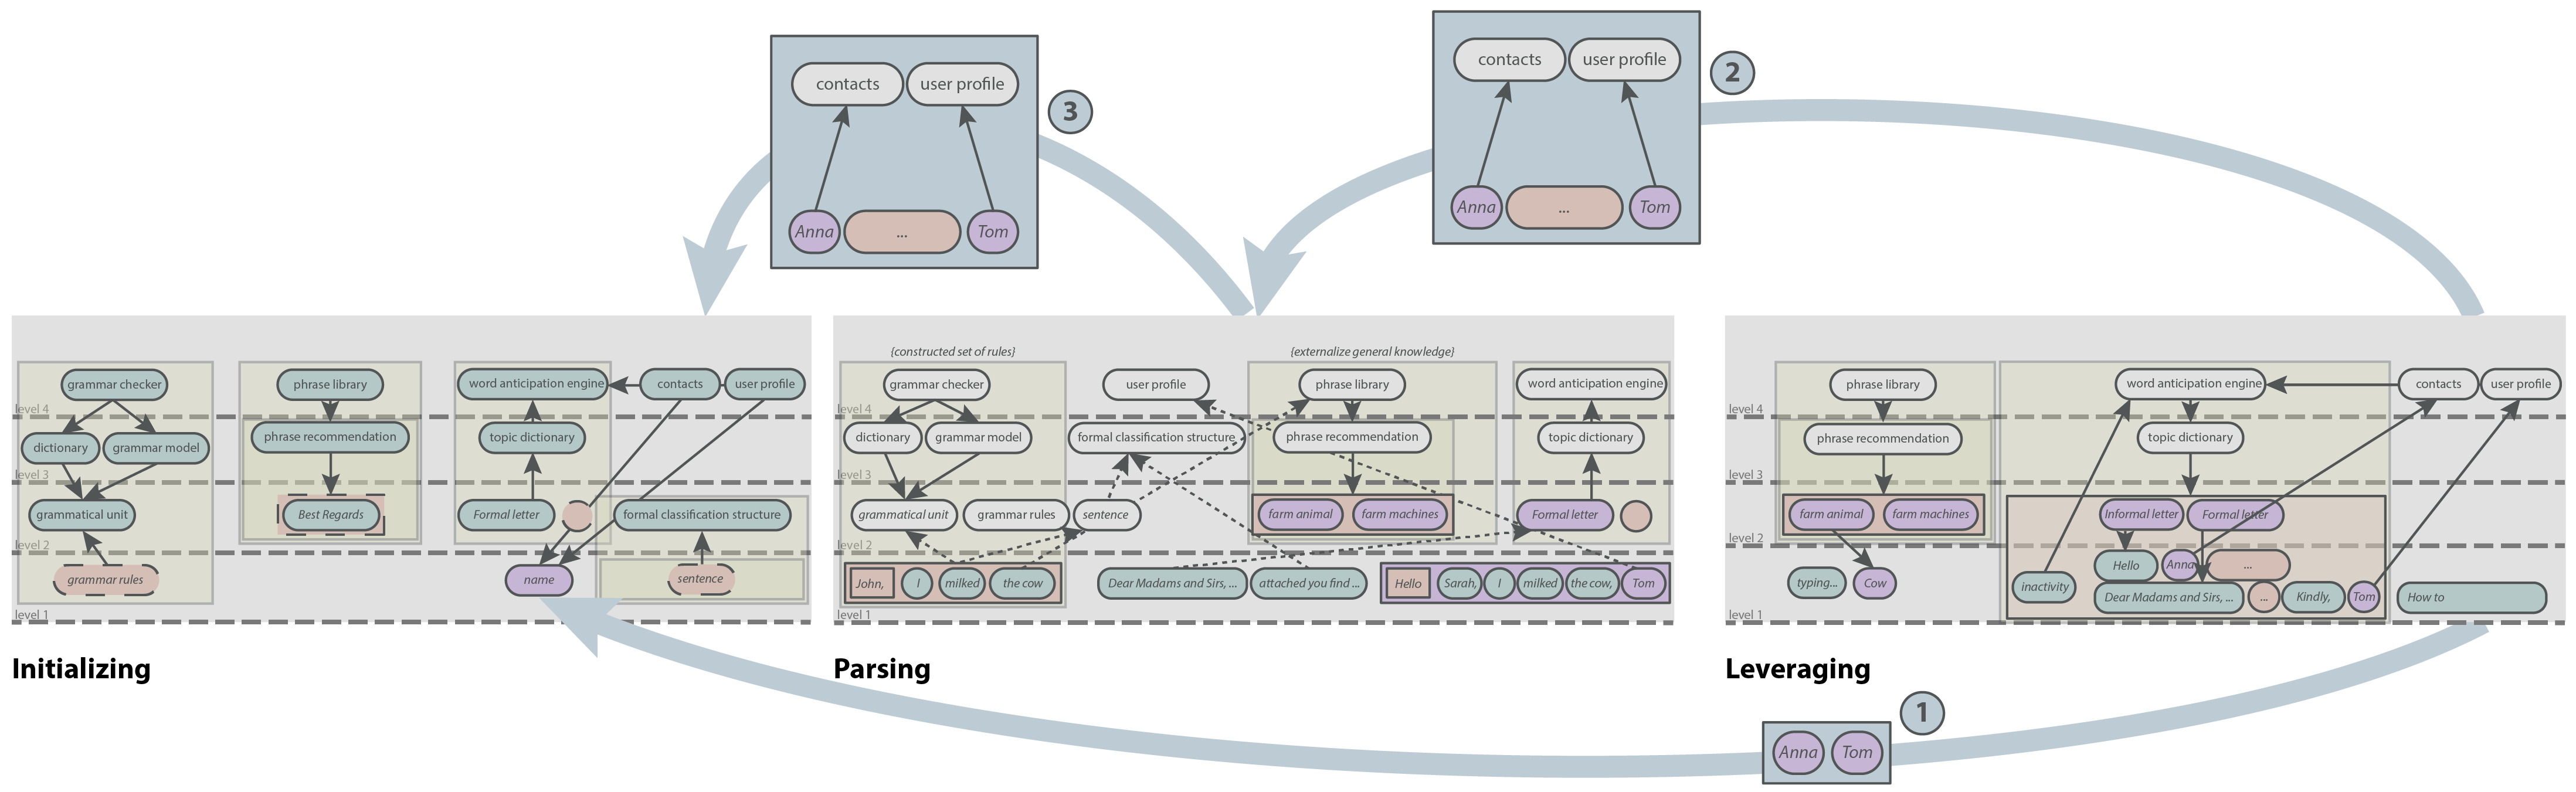 Iterative refinement of the provenance task abstraction framework.